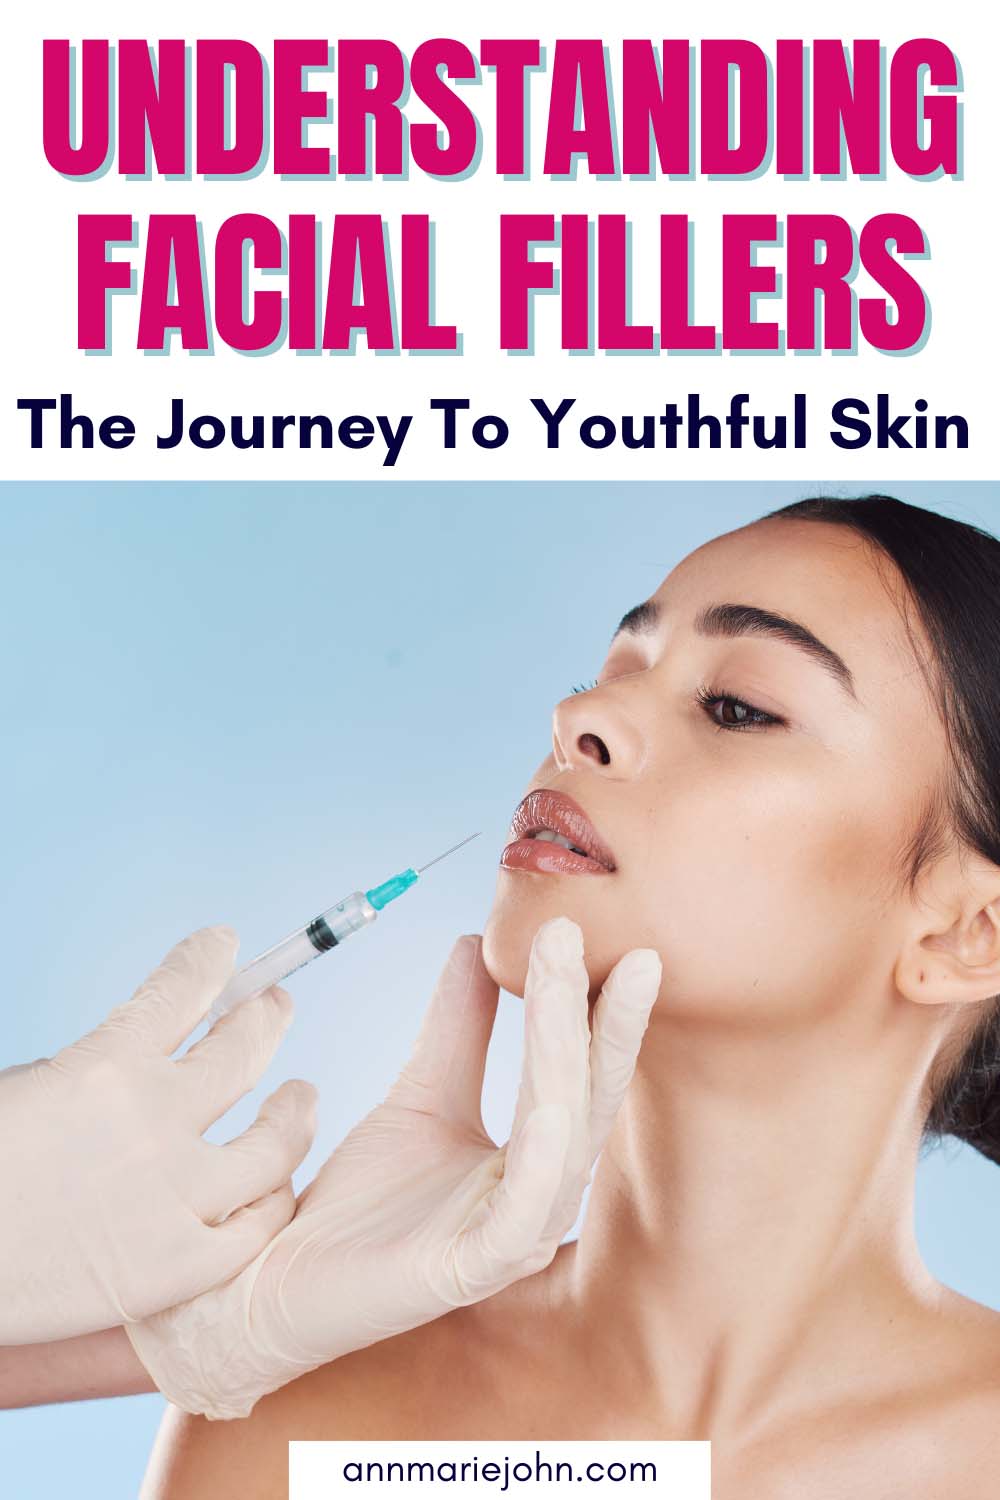 The Journey To Youthful Skin: Understanding Facial Fillers